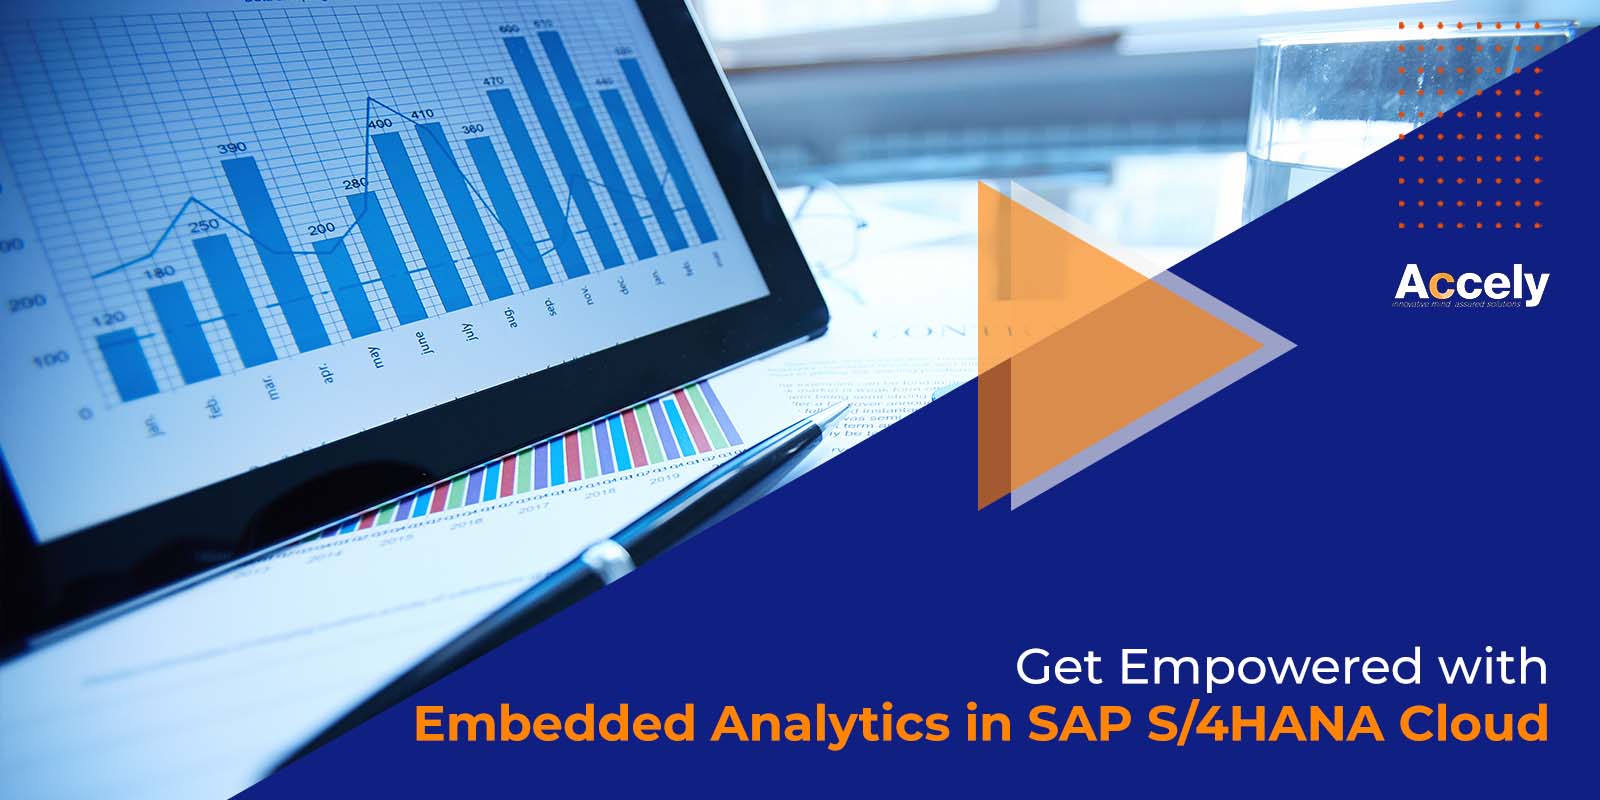 Get Empowered with Embedded Analytics in SAP S/4HANA Cloud